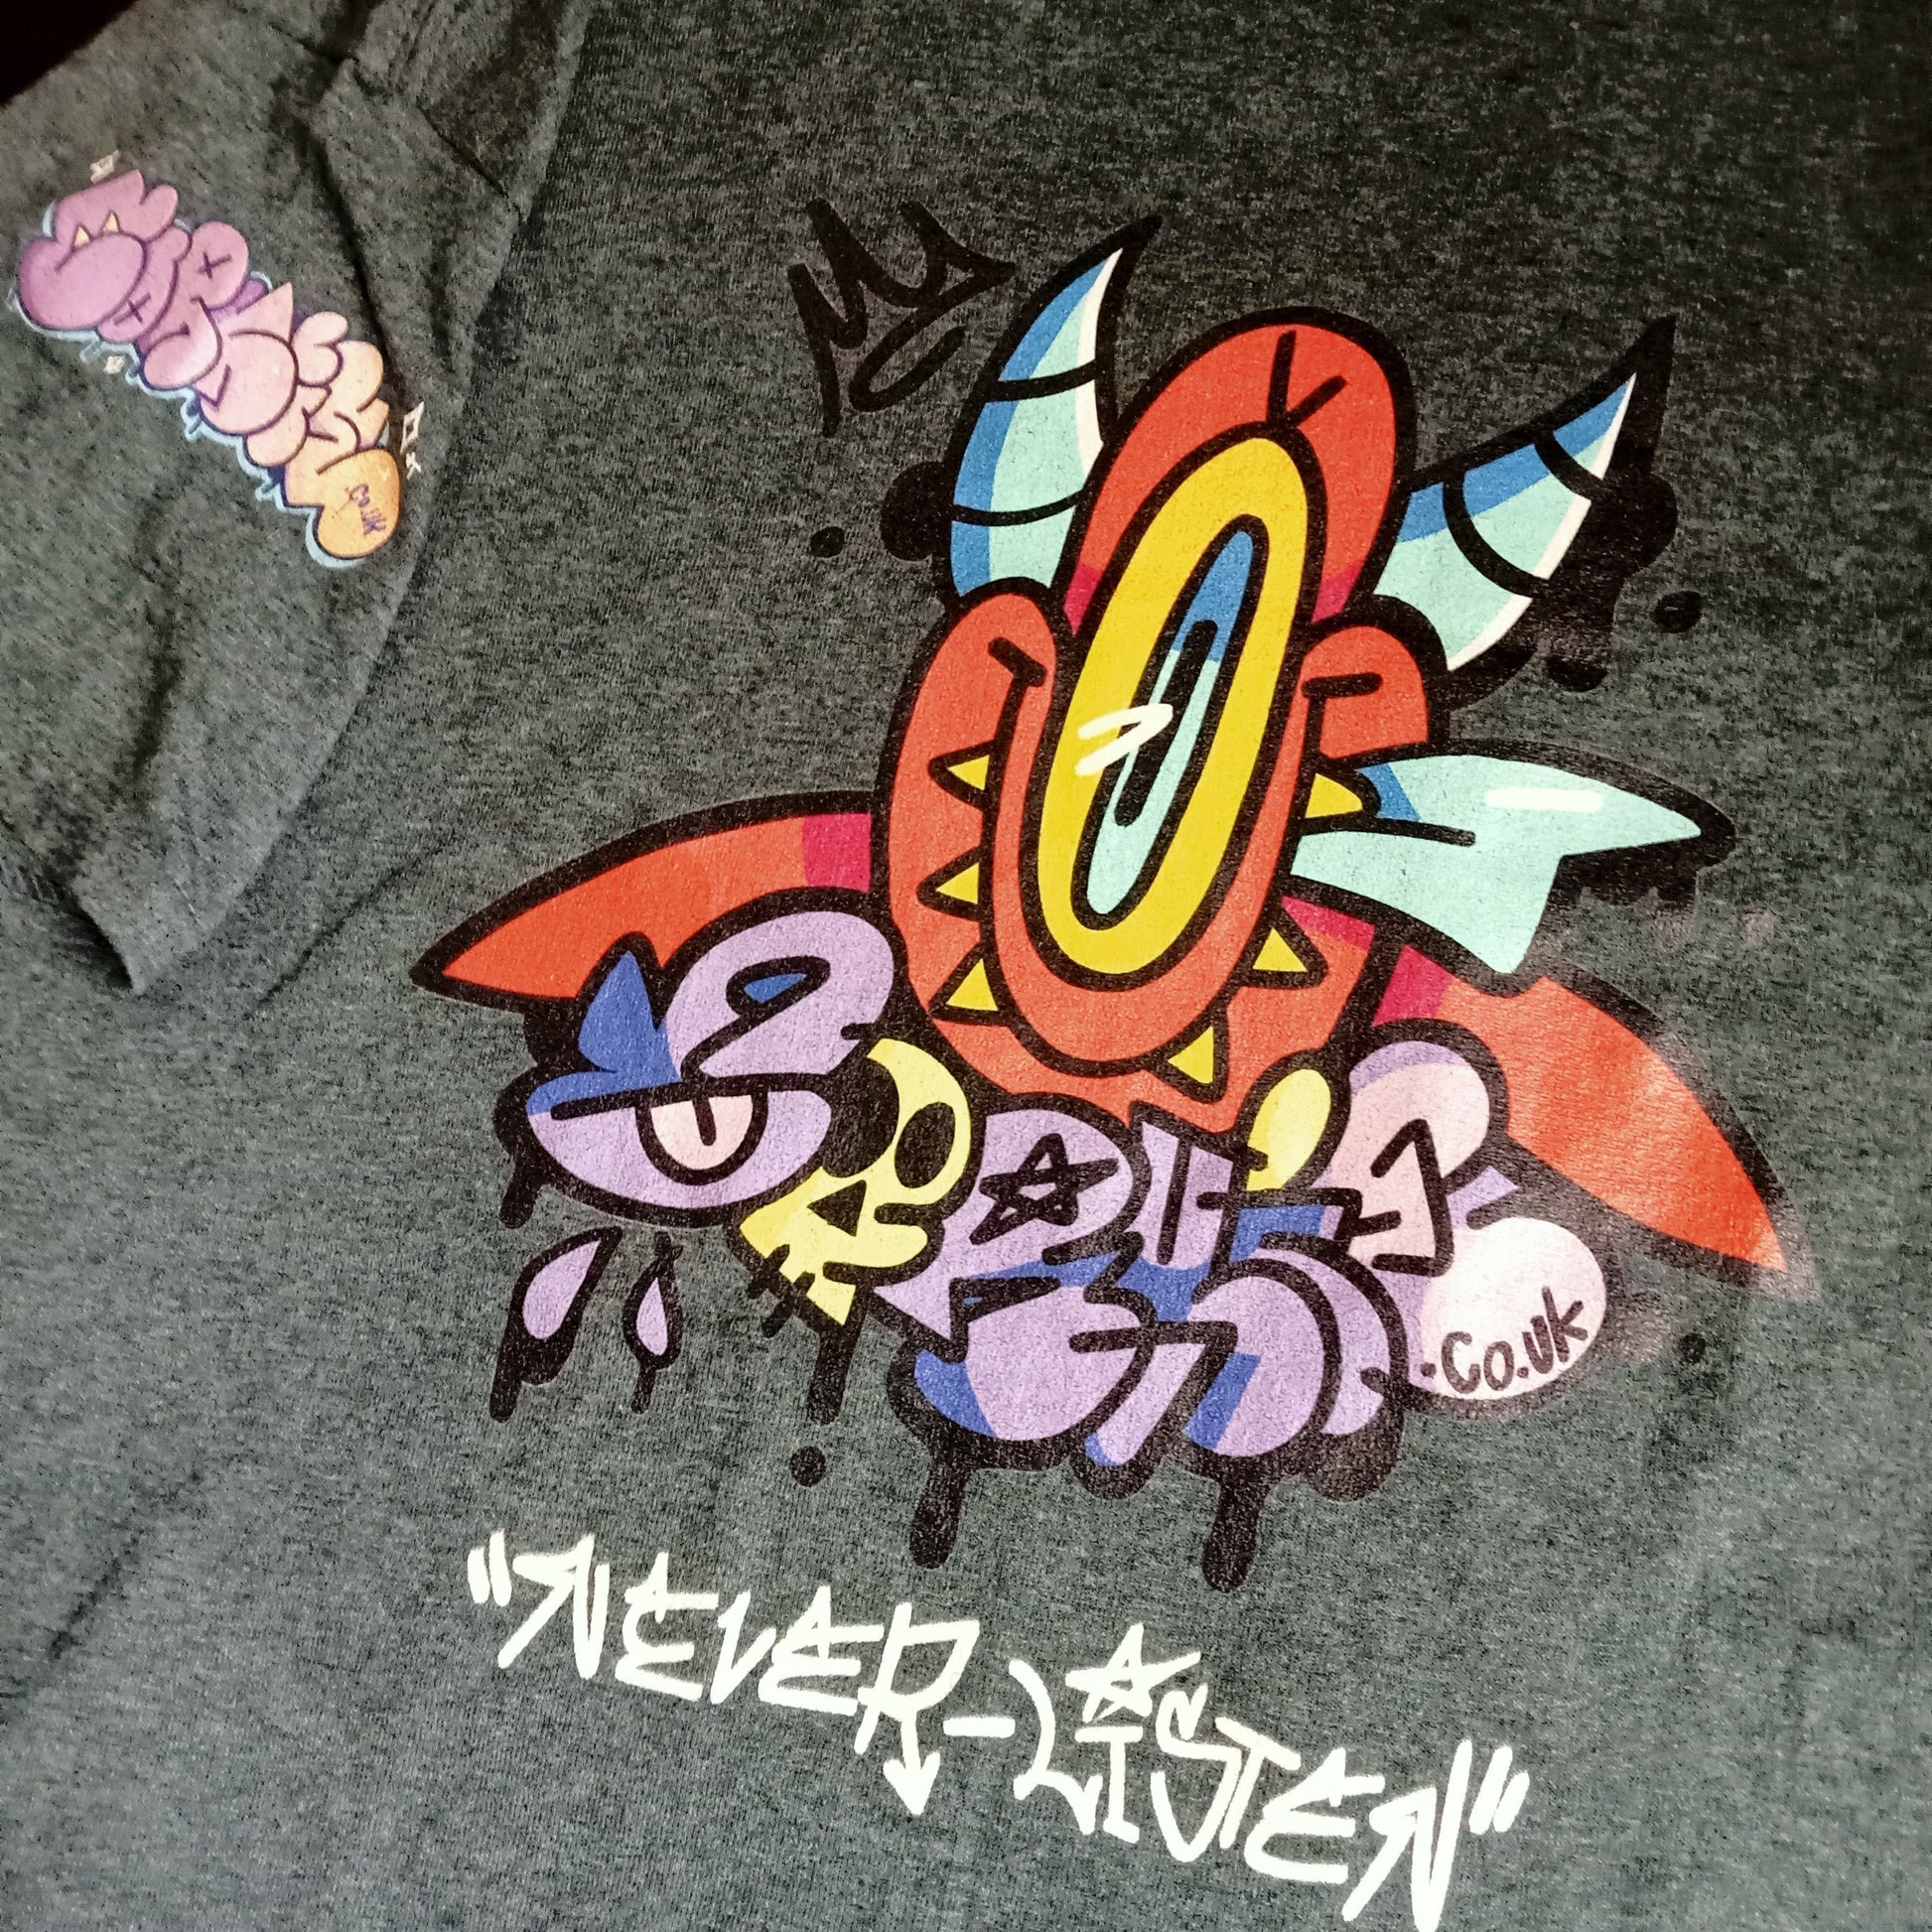 street wear devil shirt, grey featuring hand style 'never listen' graffiti tag underneath graff devil character and a CORKiE throwie